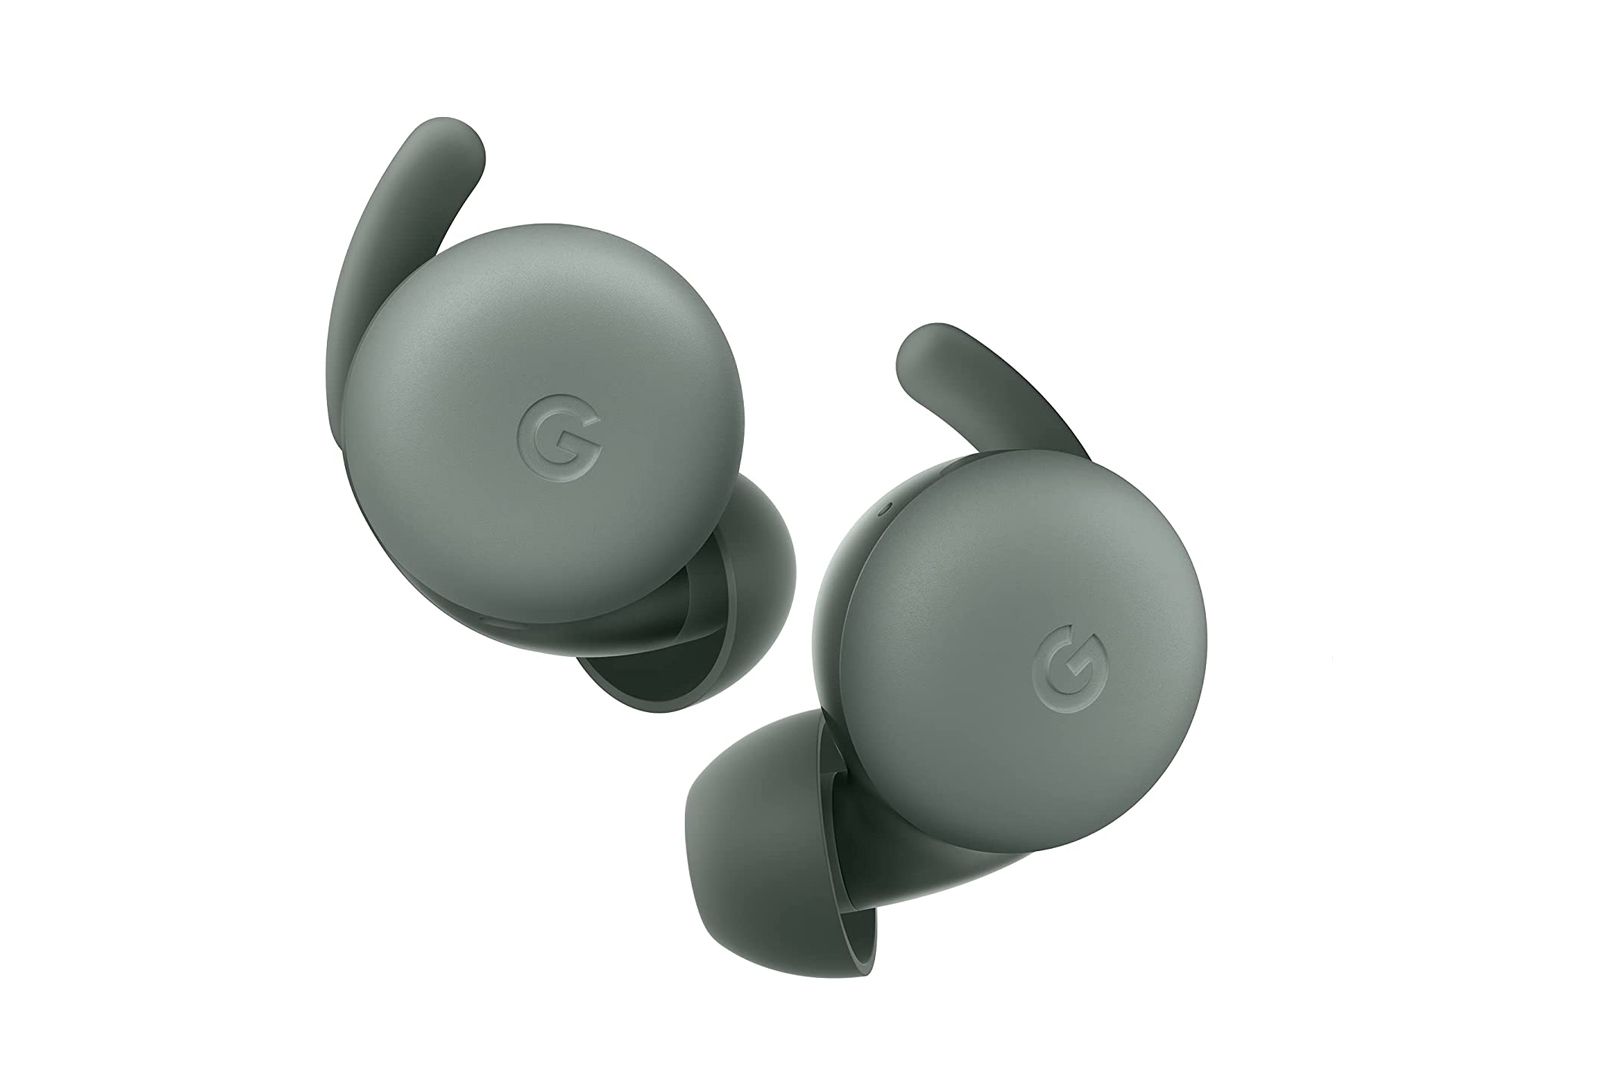 Get free Pixel Buds A-Series with Pixel 6a order photo 3